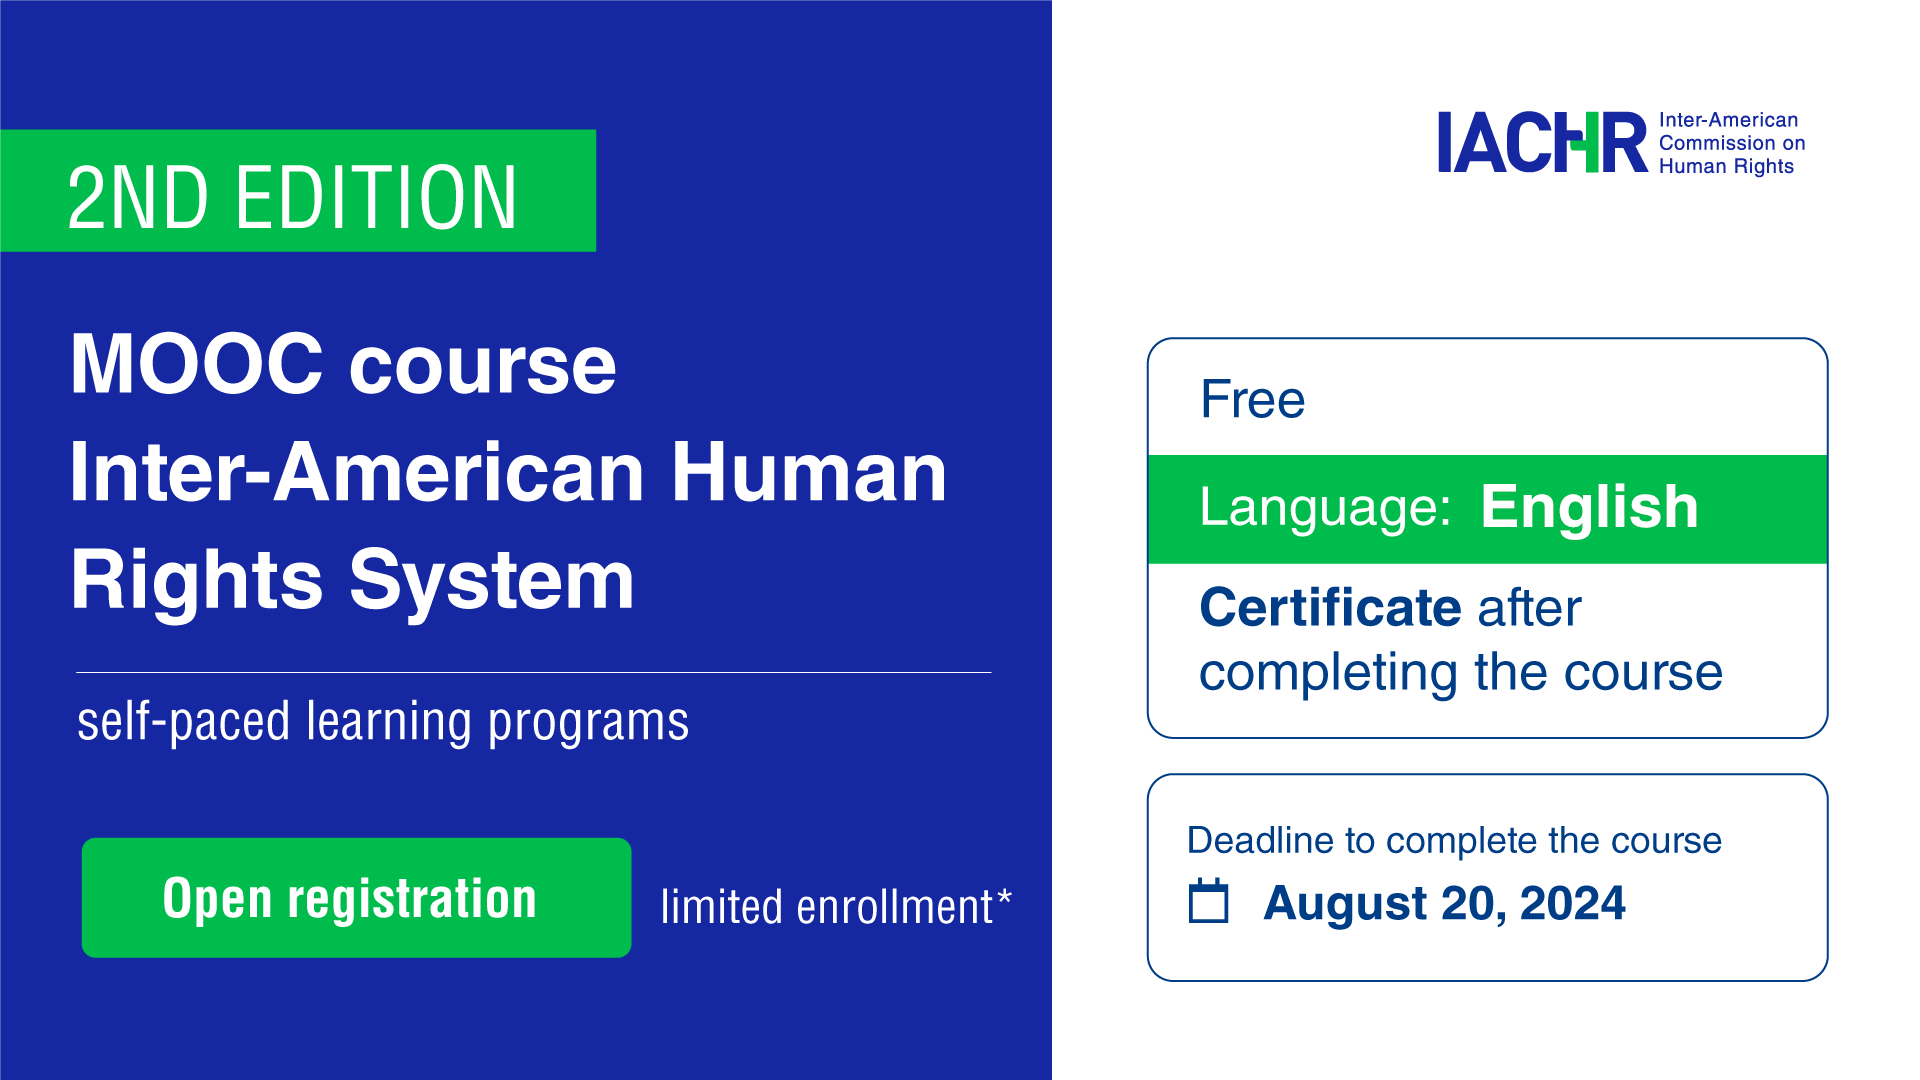 2nd Edition of MOOC course on the Inter-American Human Rights System